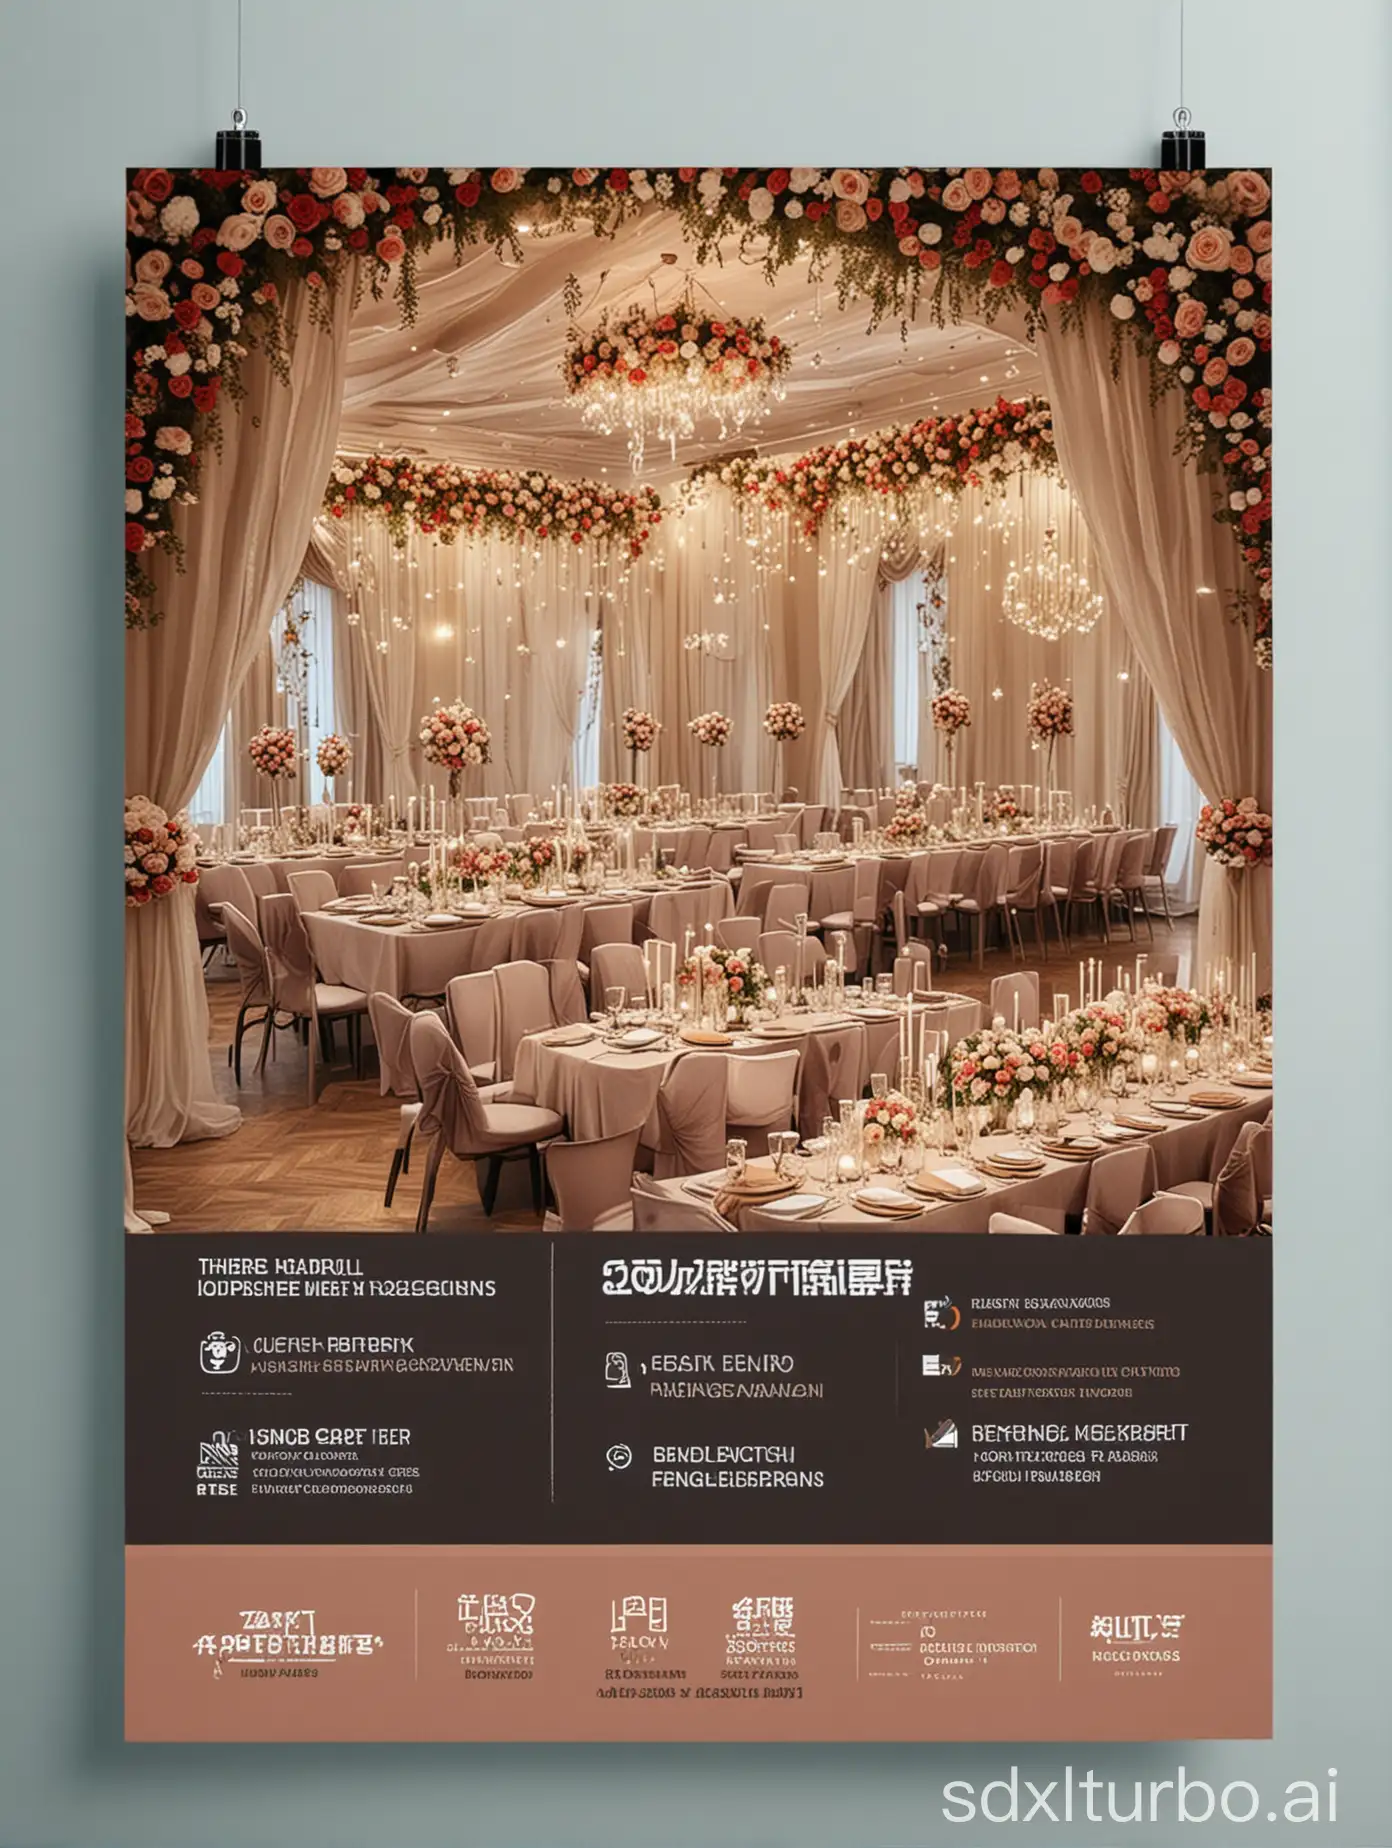 Comprehensive Event Planning Service.  organizing various events such as weddings, parties, anniversaries, and corporate gatherings by offering a range of services under one roof. Render a high quality detailed poster for the business Idea.